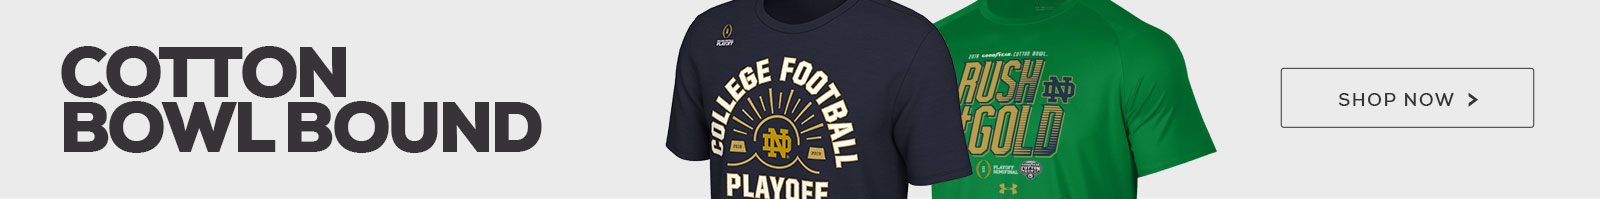 notre dame rush 4 gold jersey